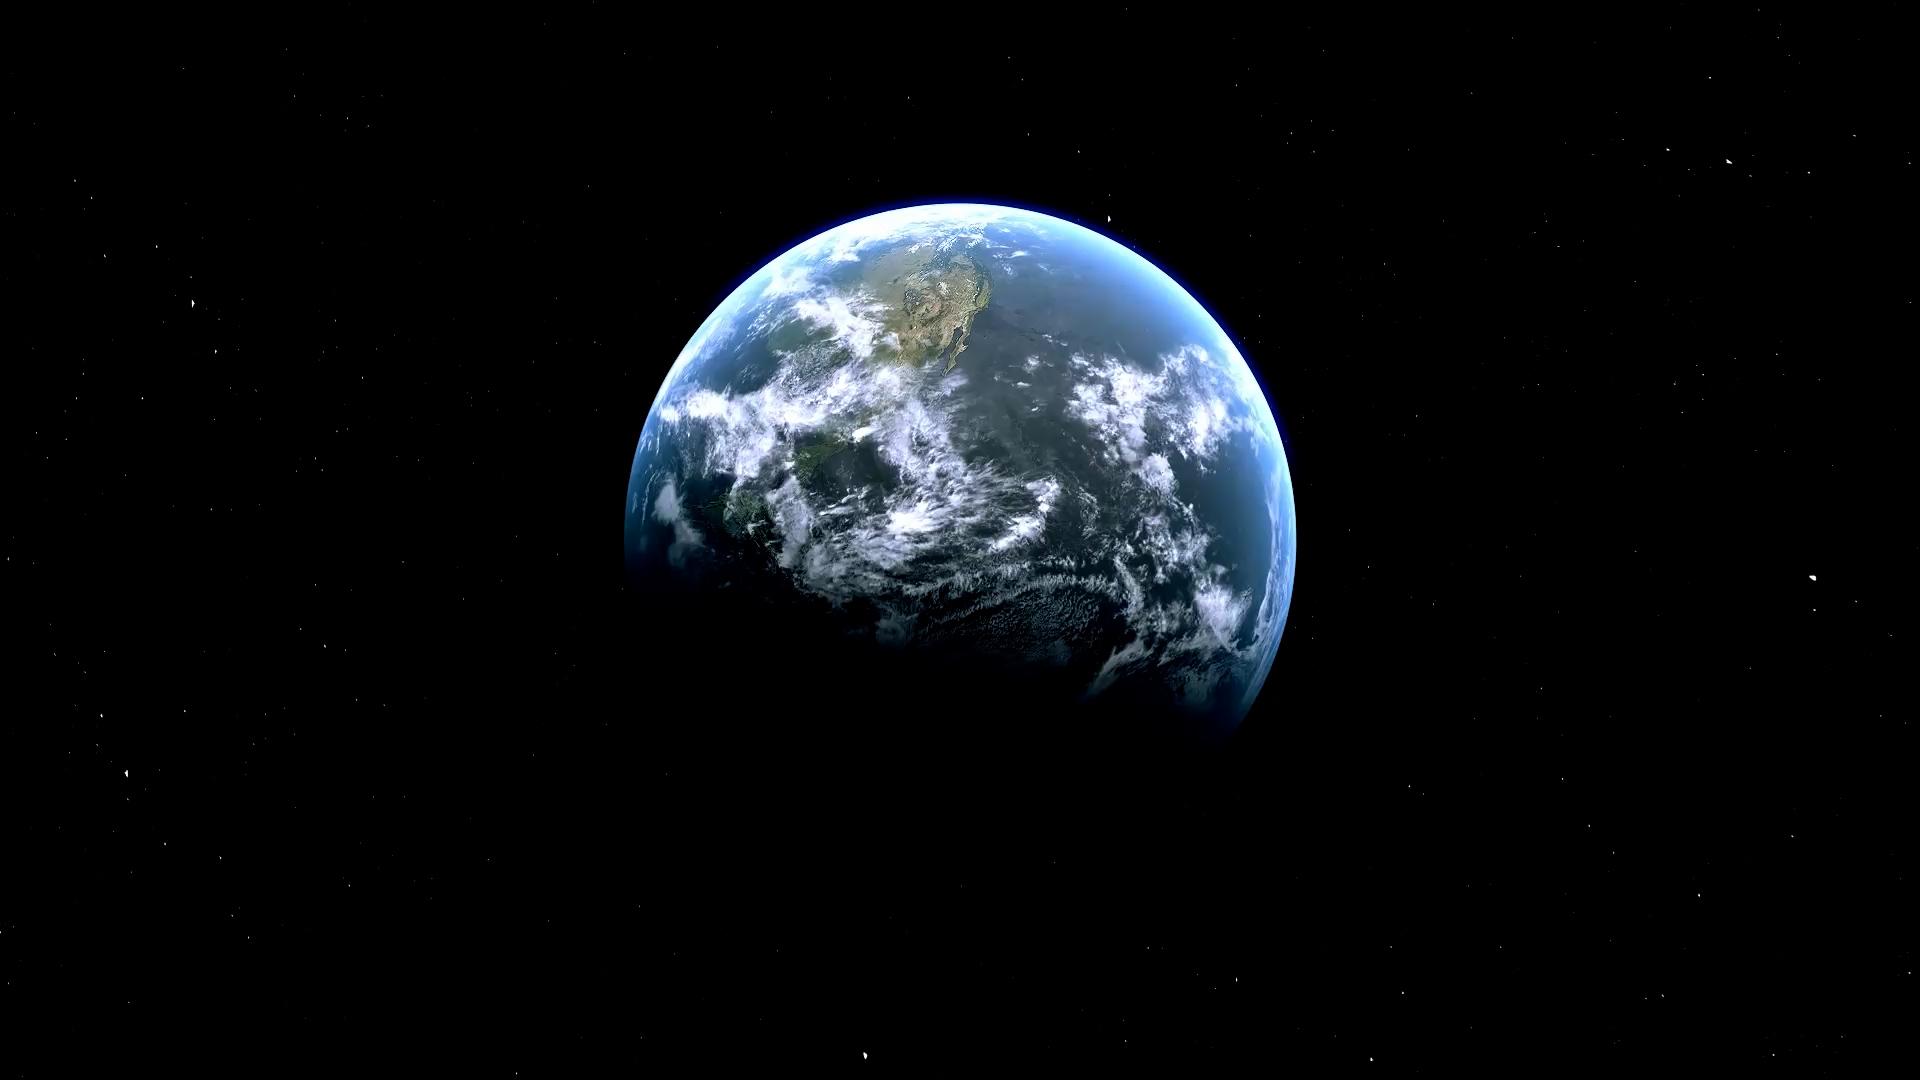 The view of the earth in space.